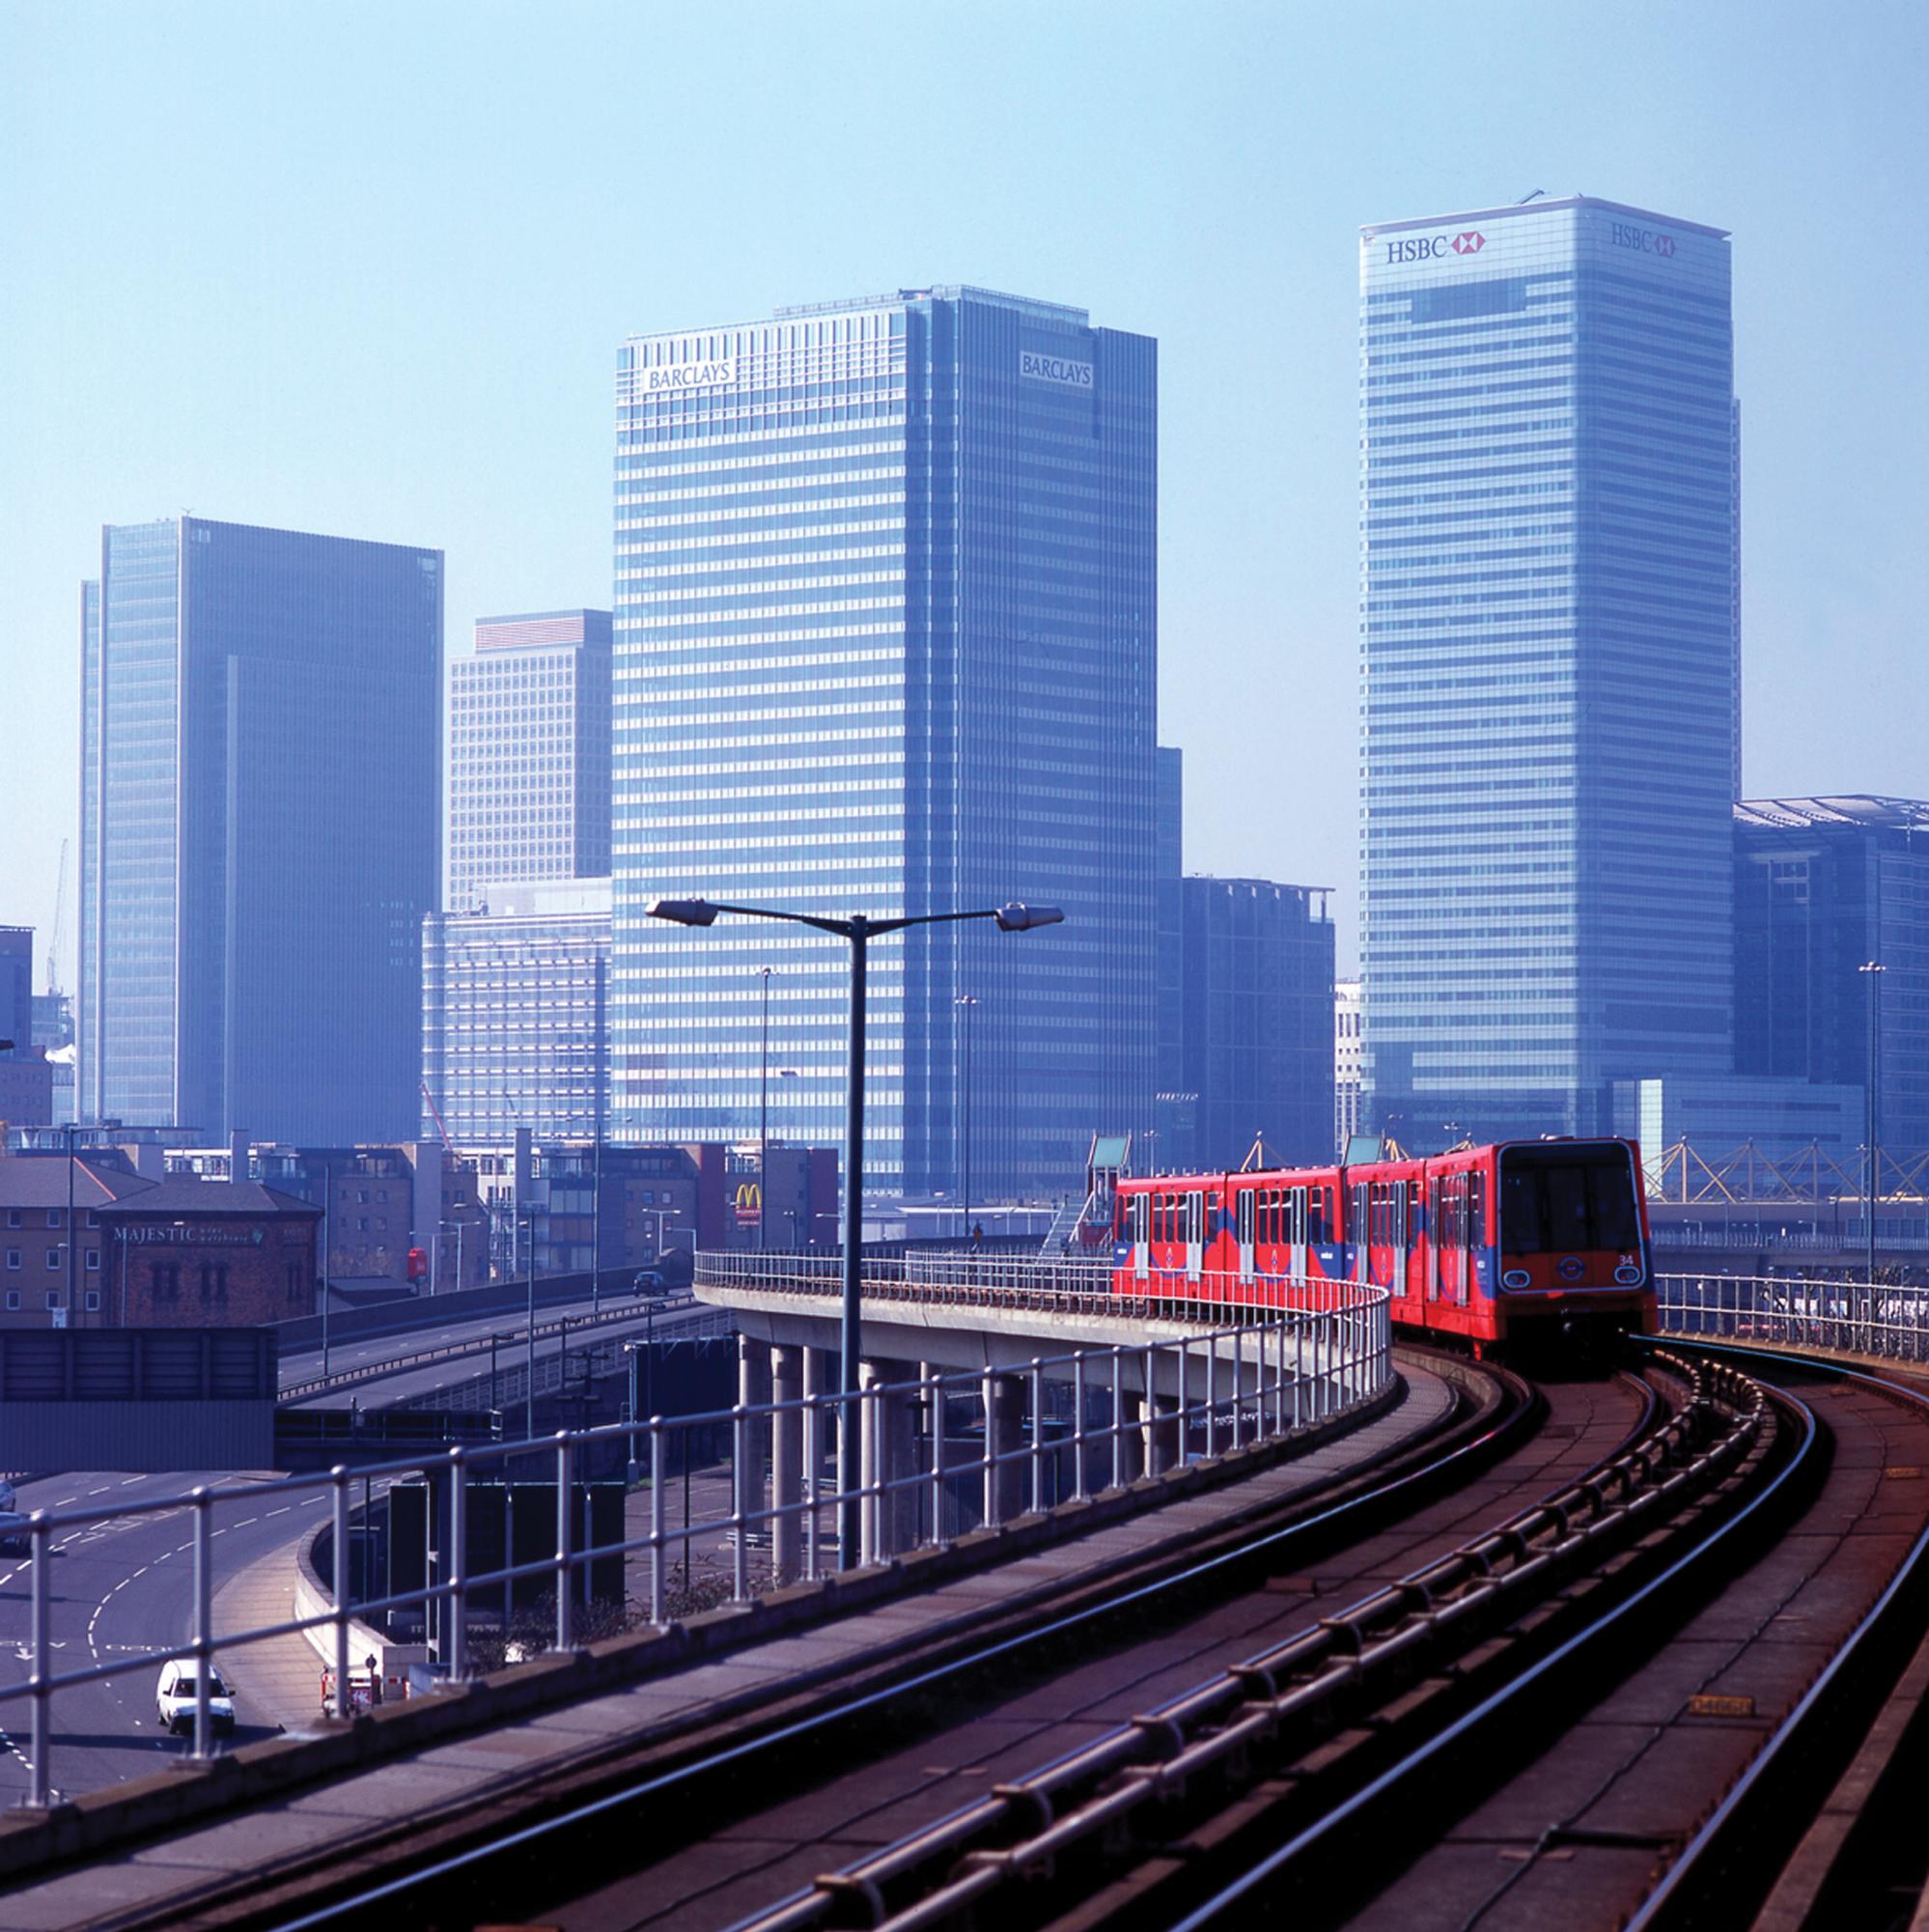 John Nellthorp of ITS Leeds is leading the research. The Docklands Light Railway has been cited as an example of transport infrastructure that has boosted land and property values